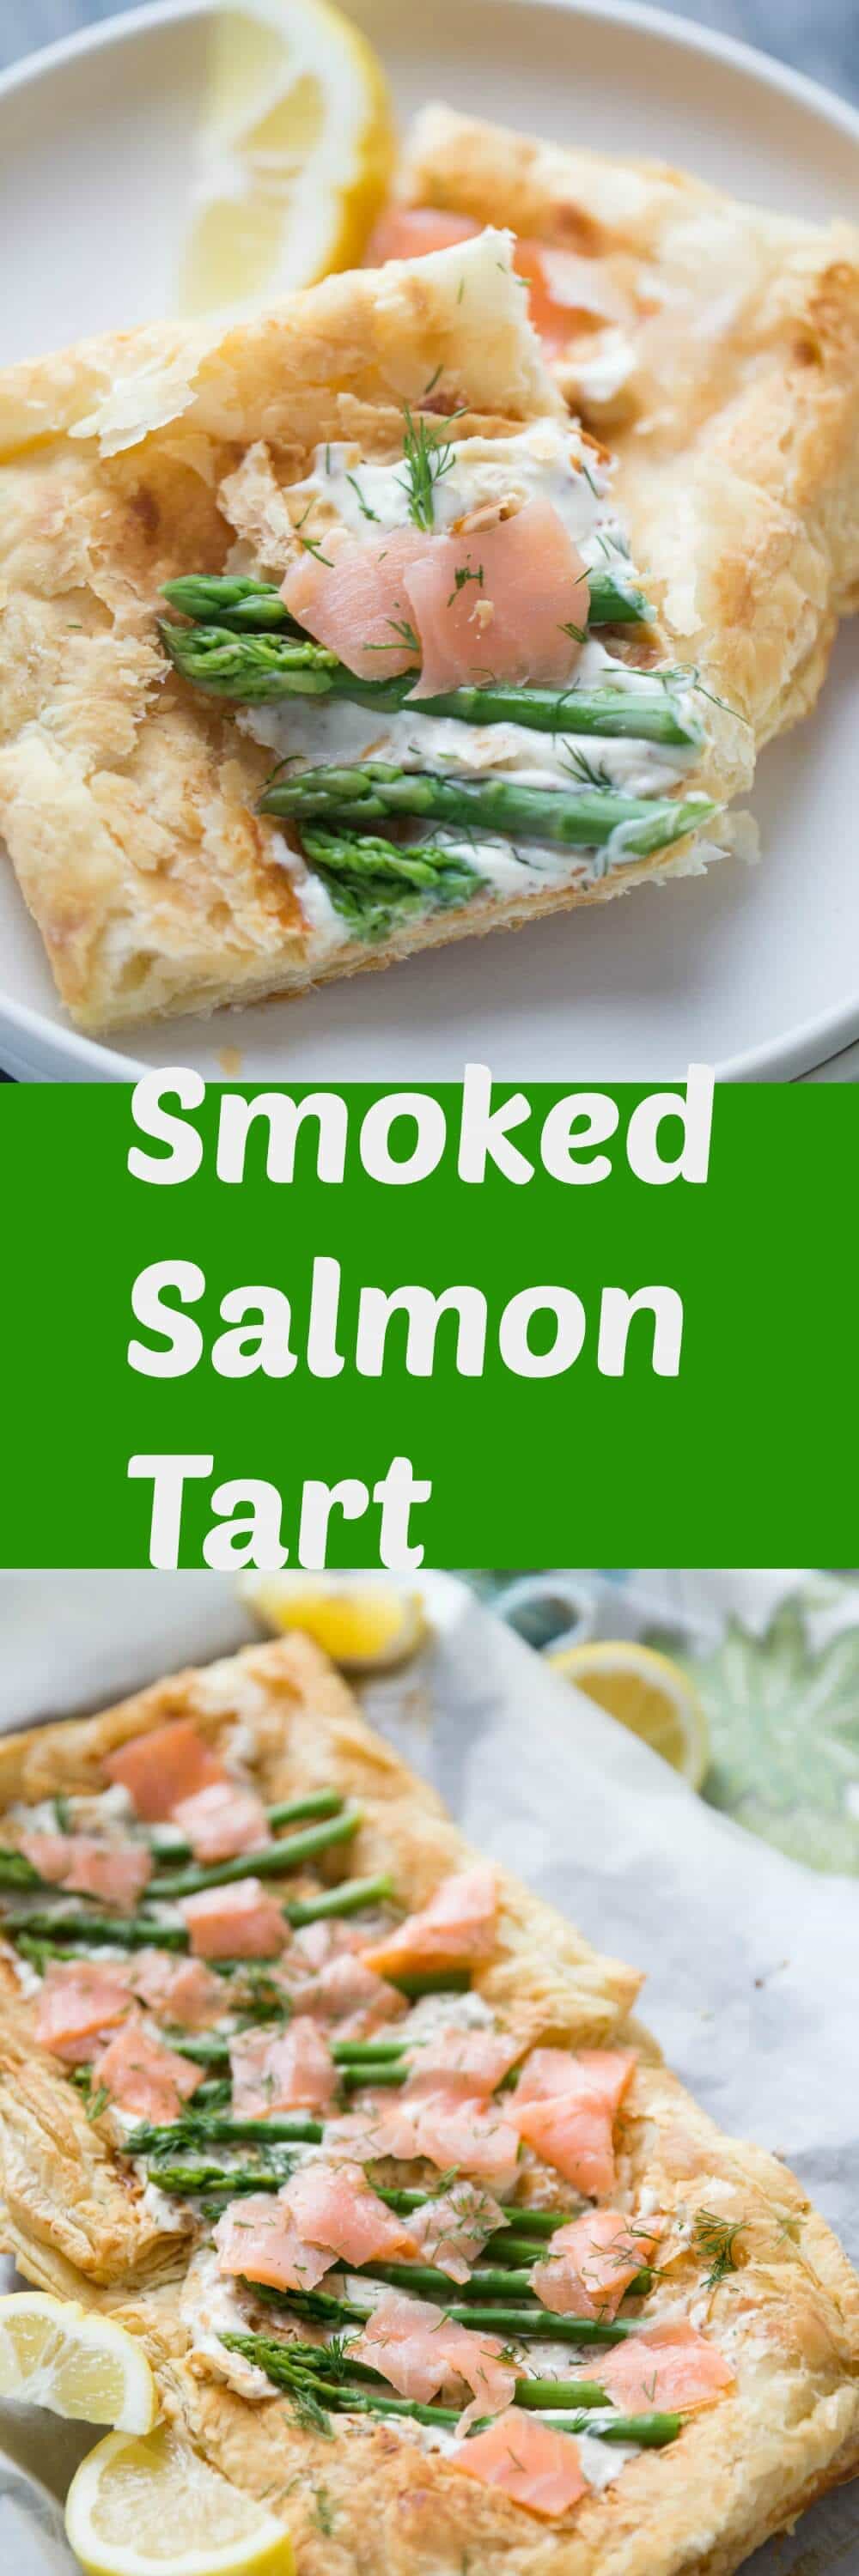 This recipe for asparagus and smoked salmon tart is impressive yet simple! This light and flaky dish is a light and tasty dish that is perfect for spring!